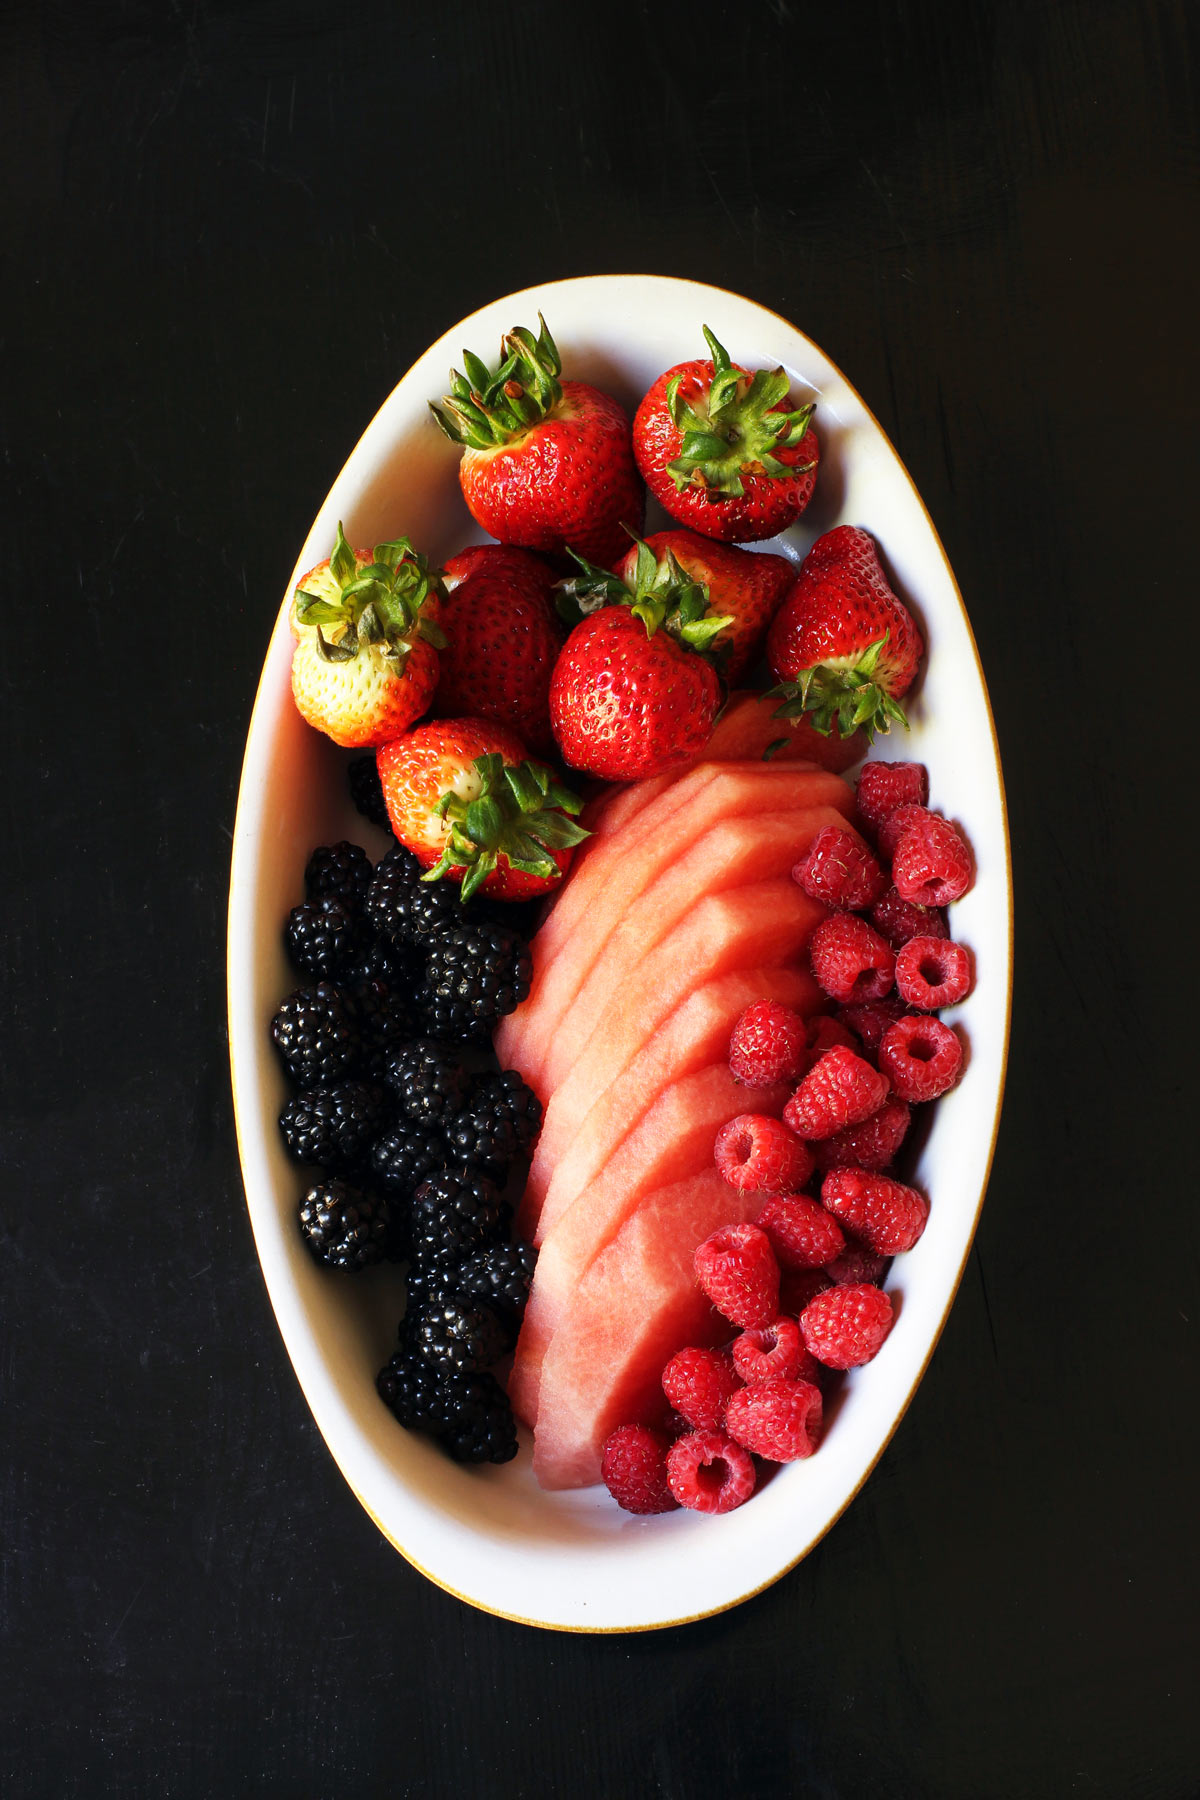 oval fruit tray with berries and watermelon slices.